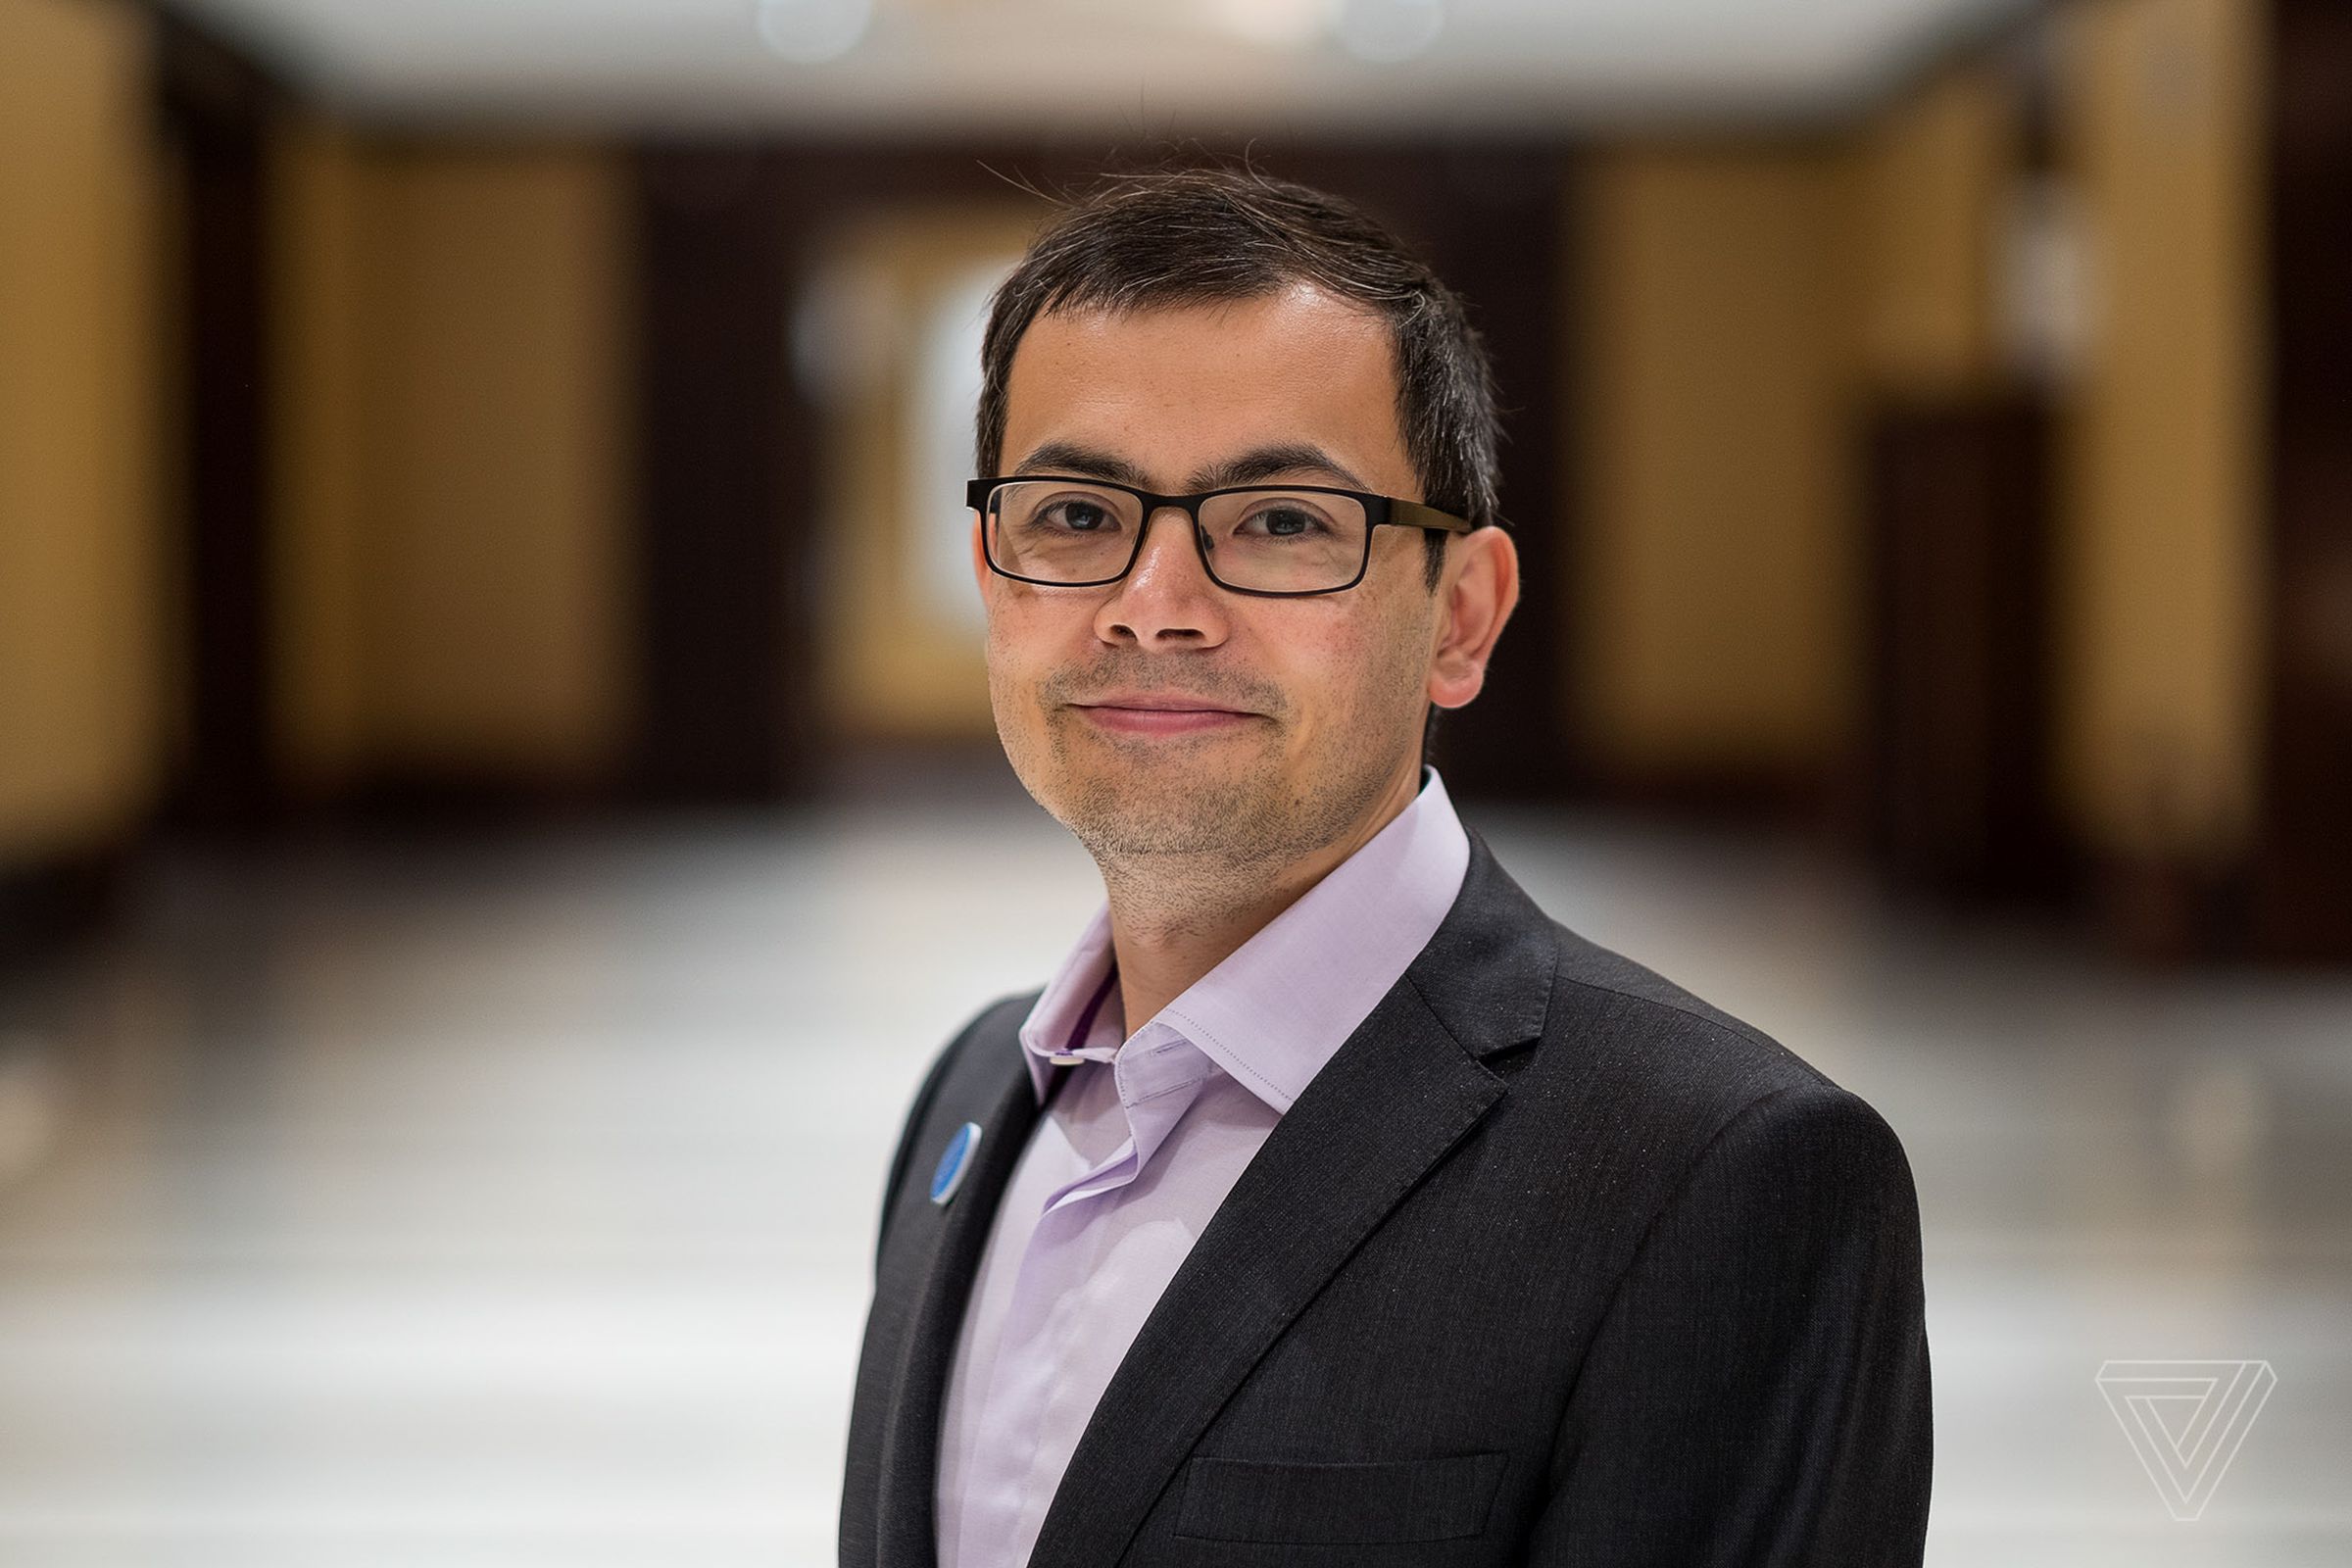 Demis Hassabis, DeepMind co-founder and CEO.